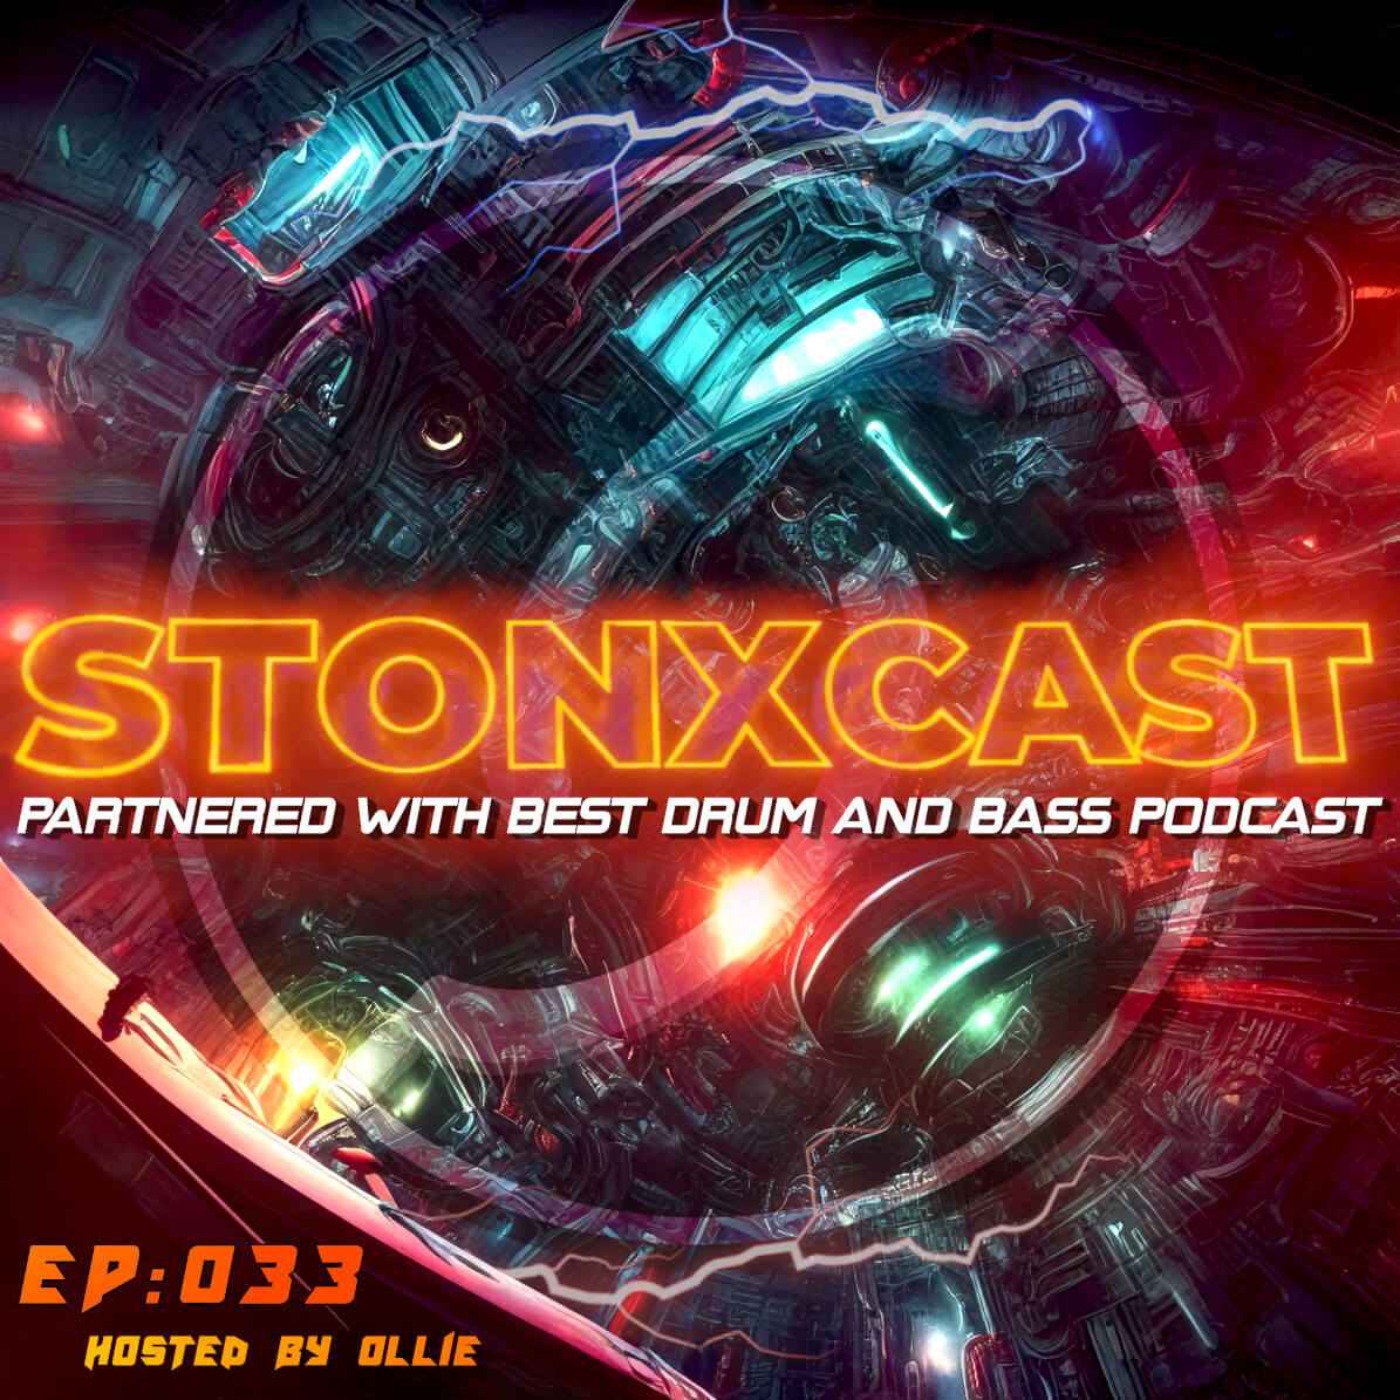  Stonxcast EP:033 - Hosted by Ollie Artwork